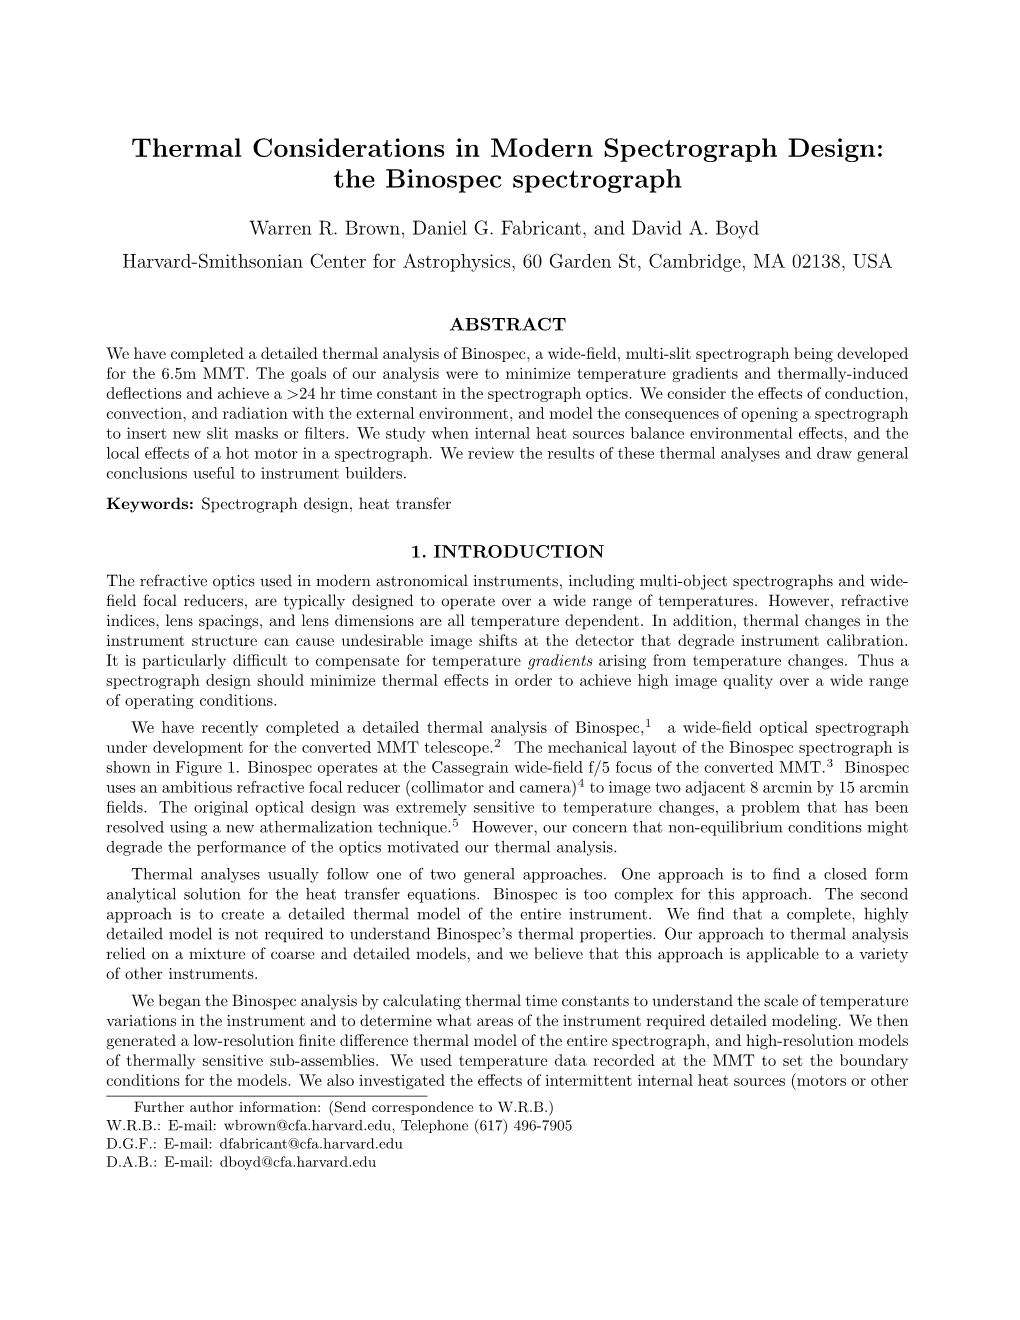 Thermal Considerations in Modern Spectrograph Design: the Binospec Spectrograph